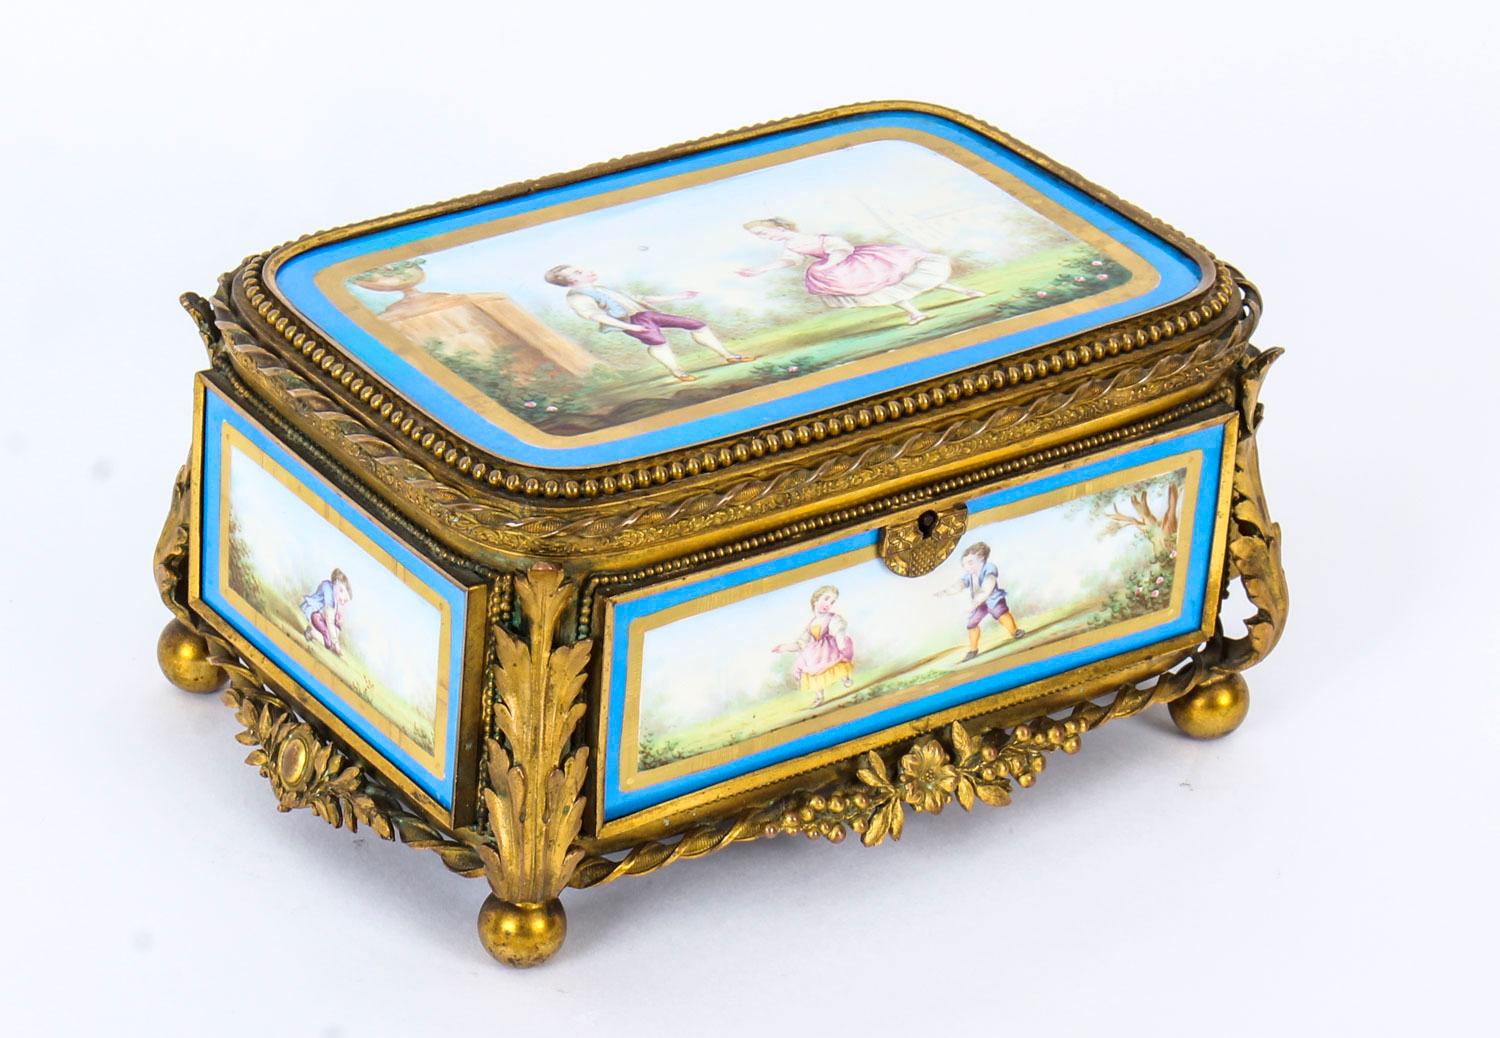 Antique French Sevres Porcelain and Ormolu Jewellery Casket 19th Century  For Sale 14